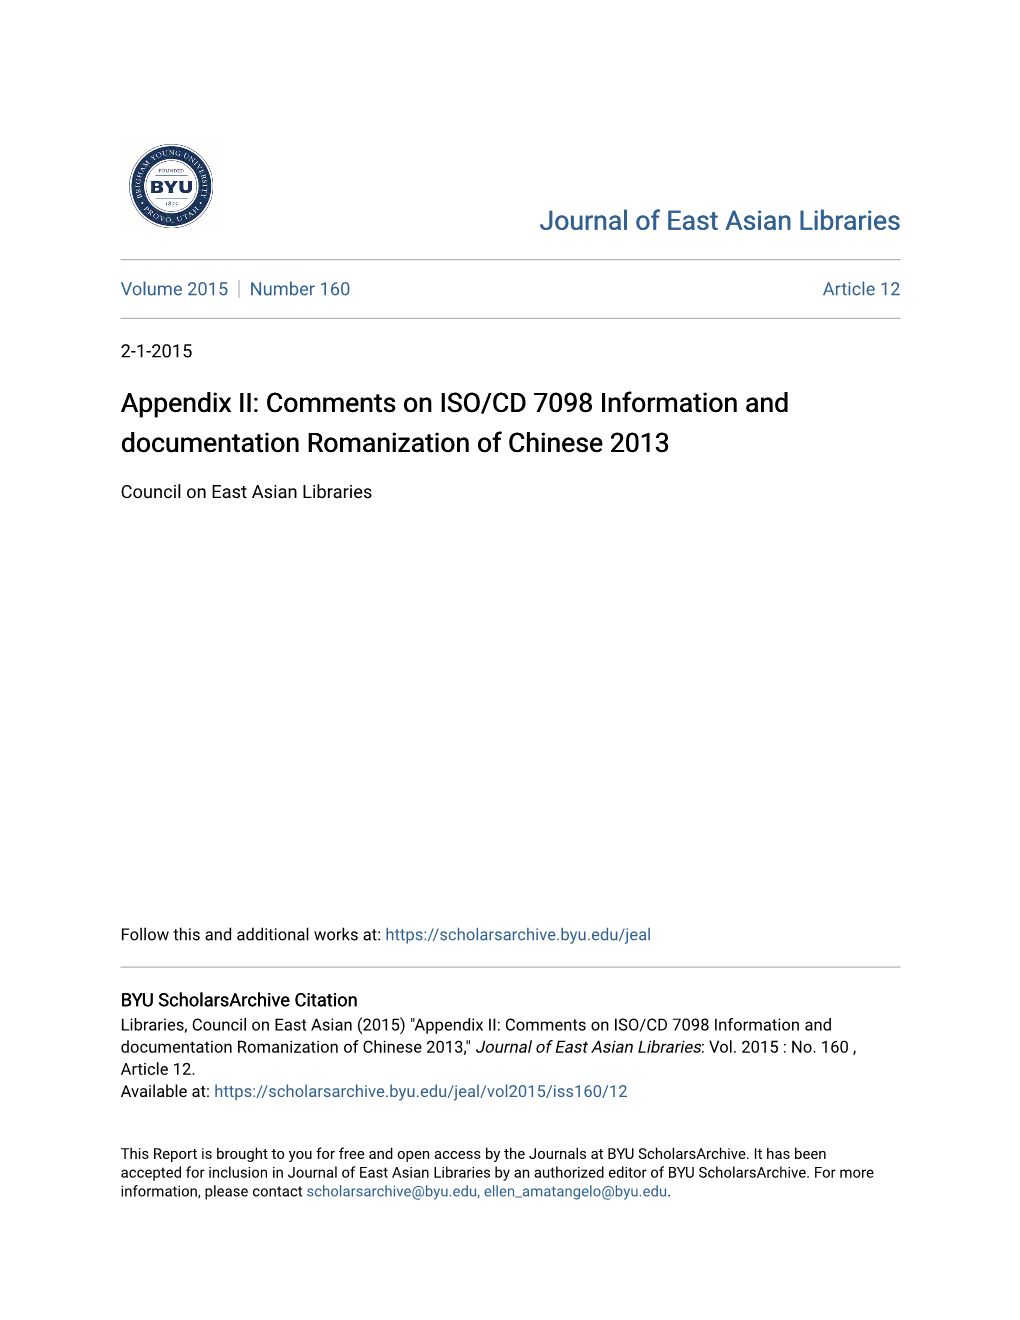 Appendix II: Comments on ISO/CD 7098 Information and Documentation Romanization of Chinese 2013